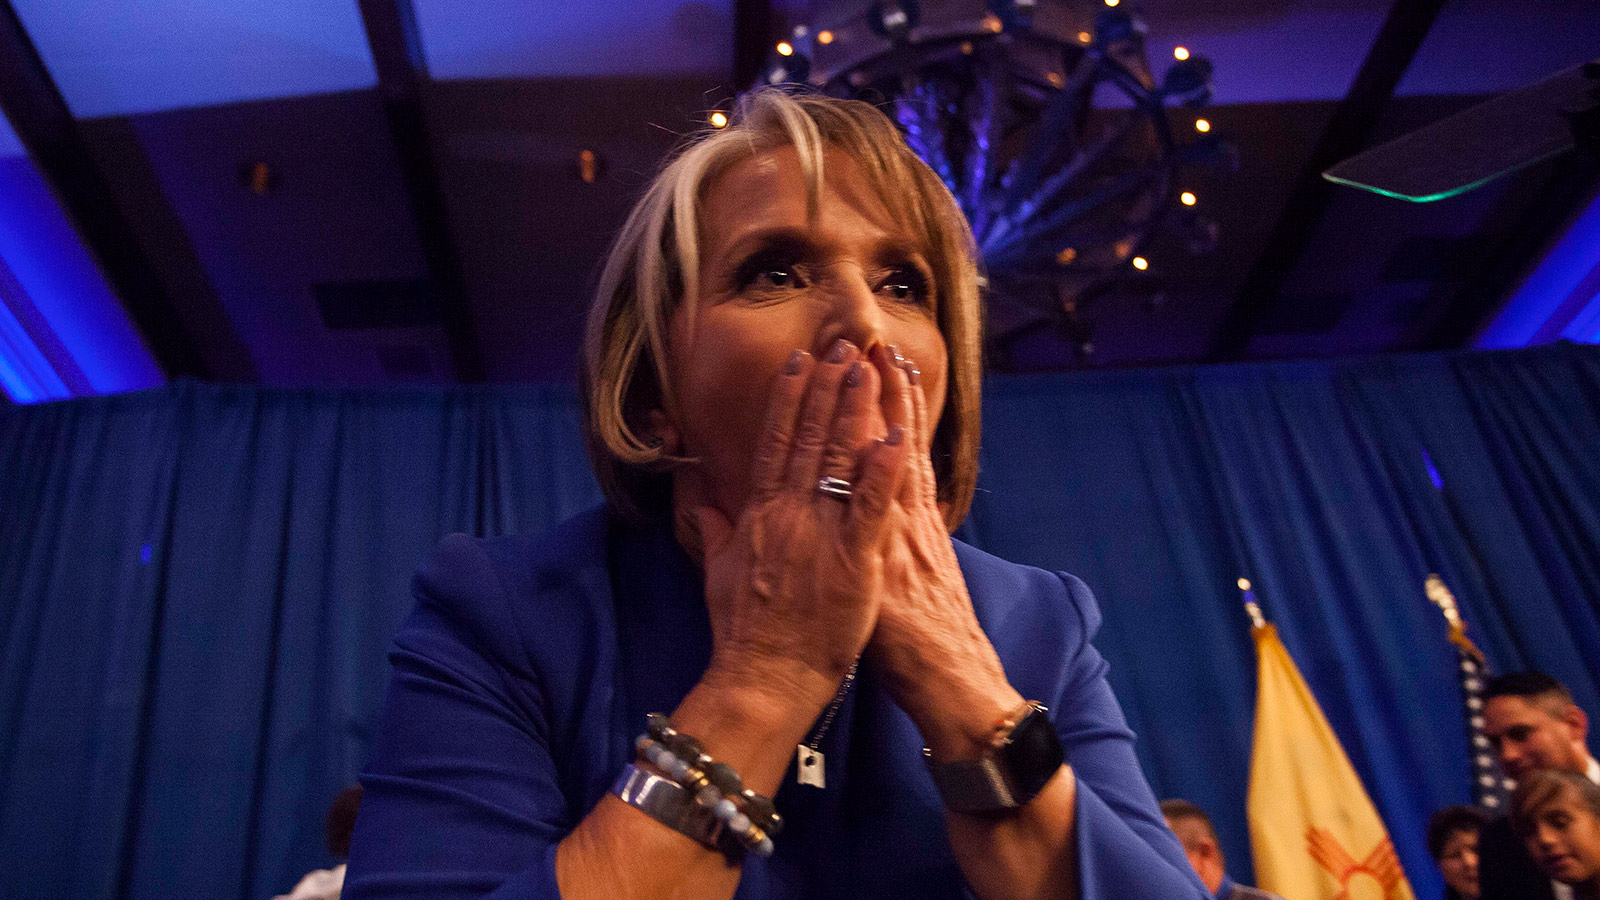 New Mexico Governor-elect Michelle Lujan Grisham blows kisses to supporters following her acceptance speech during midterms' election night in Albuquerque, N.M., Tuesday, Nov. 6, 2018.